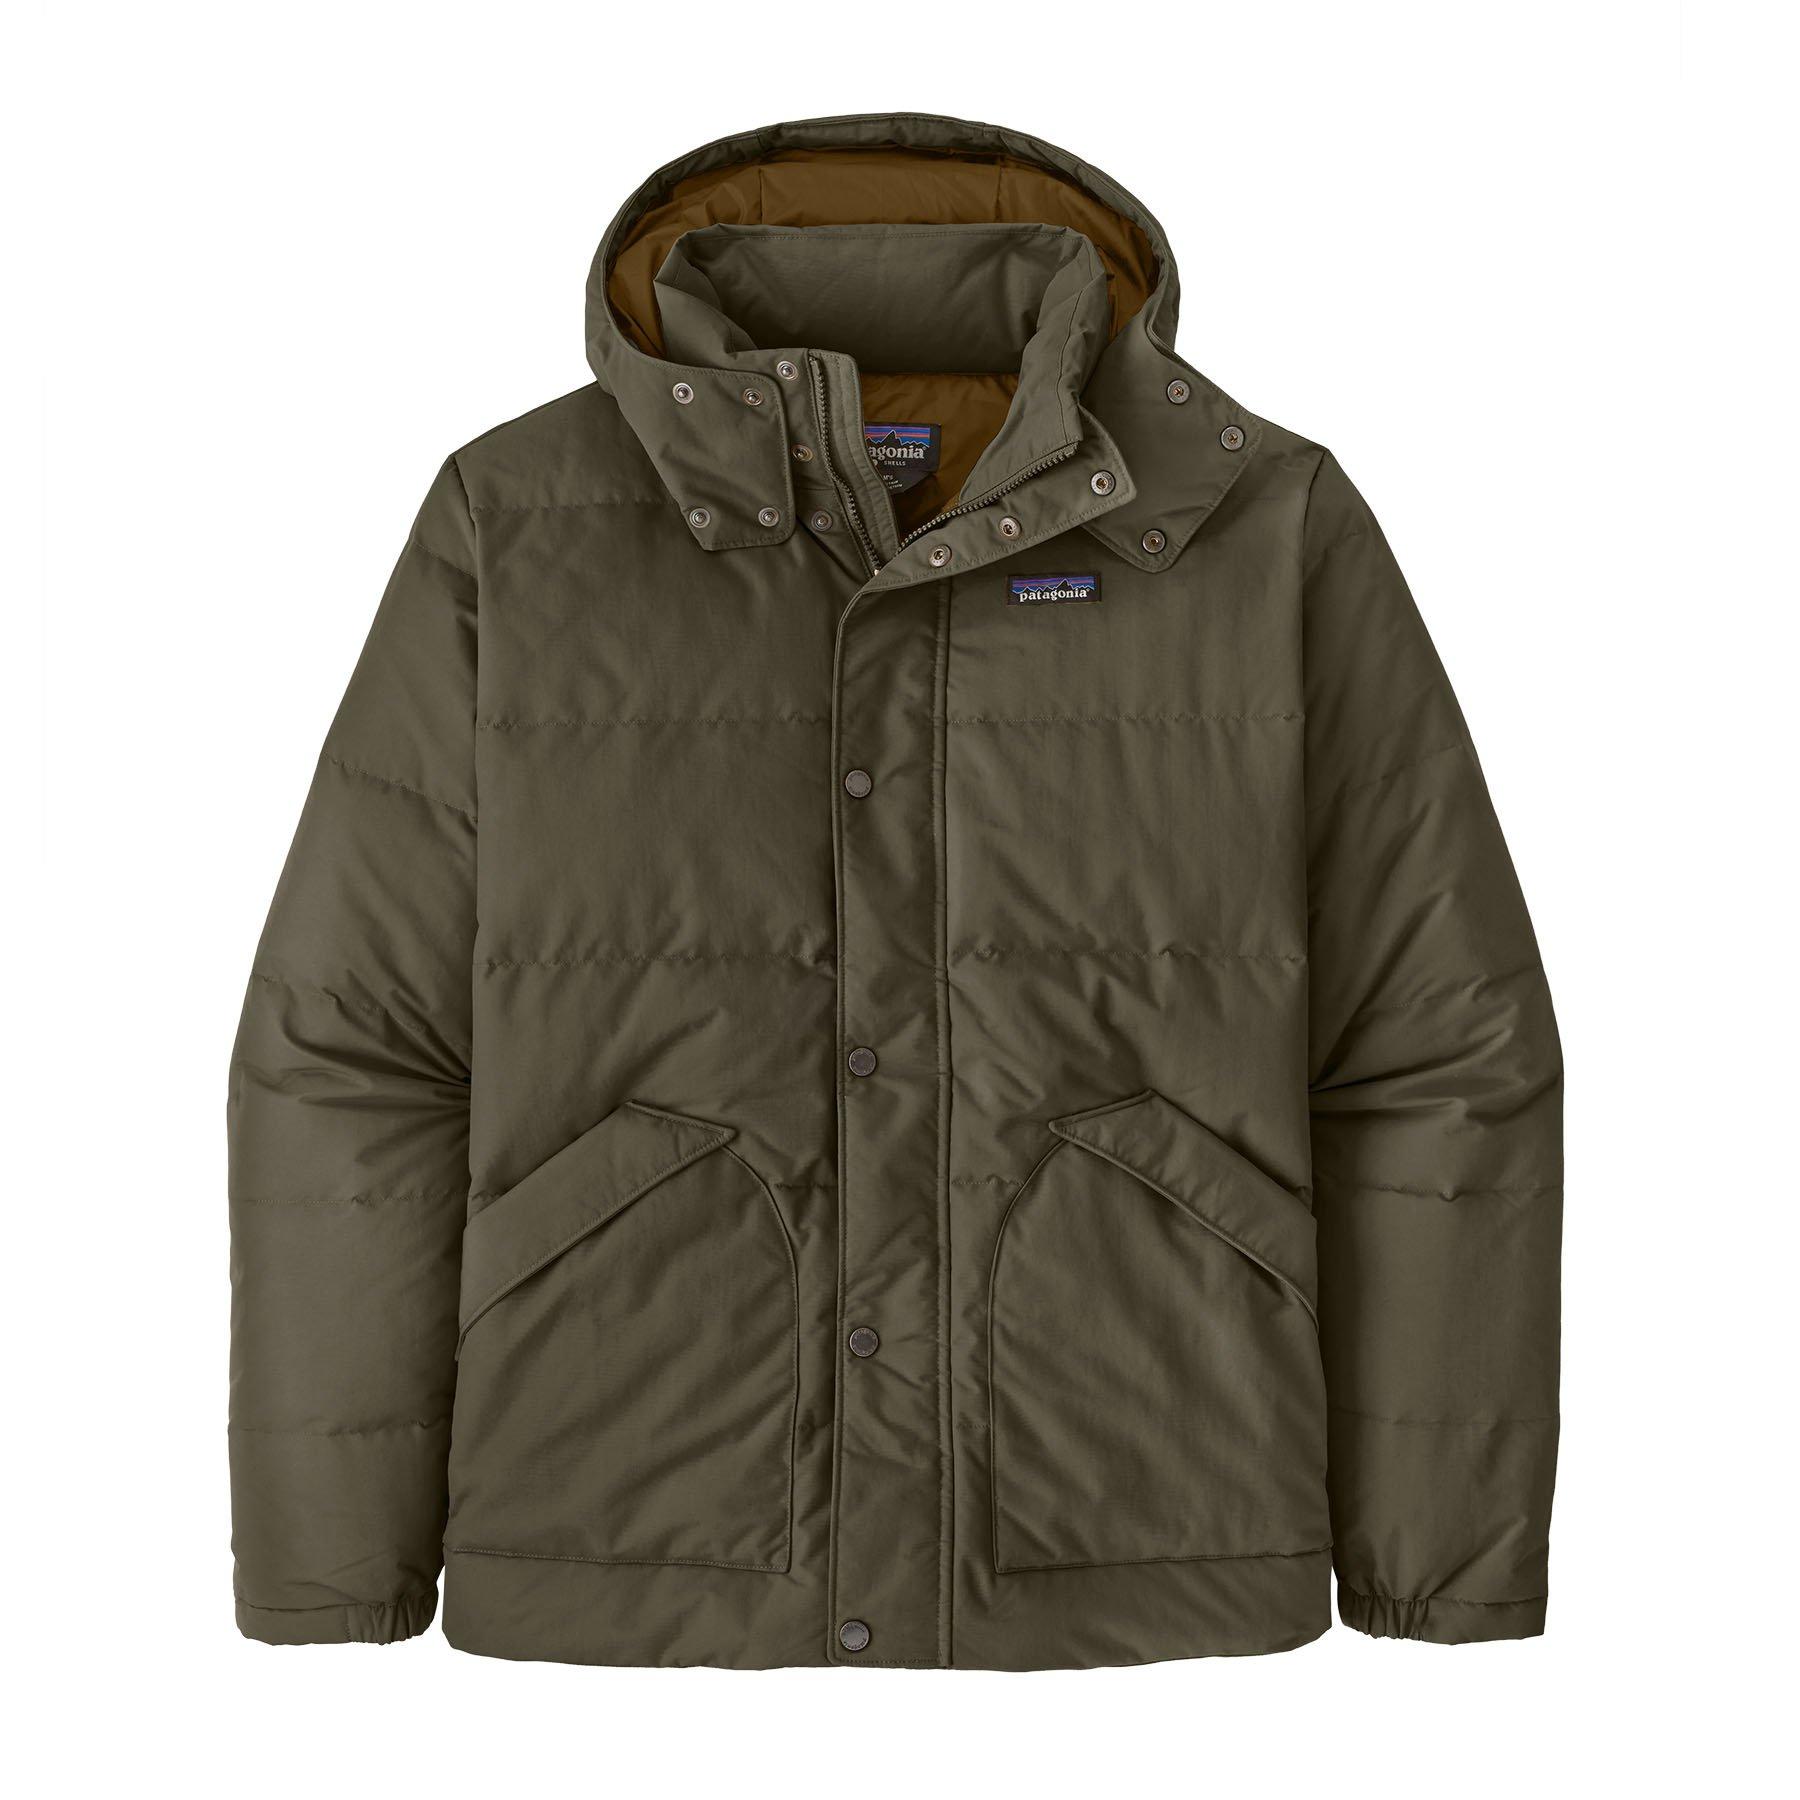 Mens | Clothing | Jackets | Down & Insulated Jackets | George Fisher